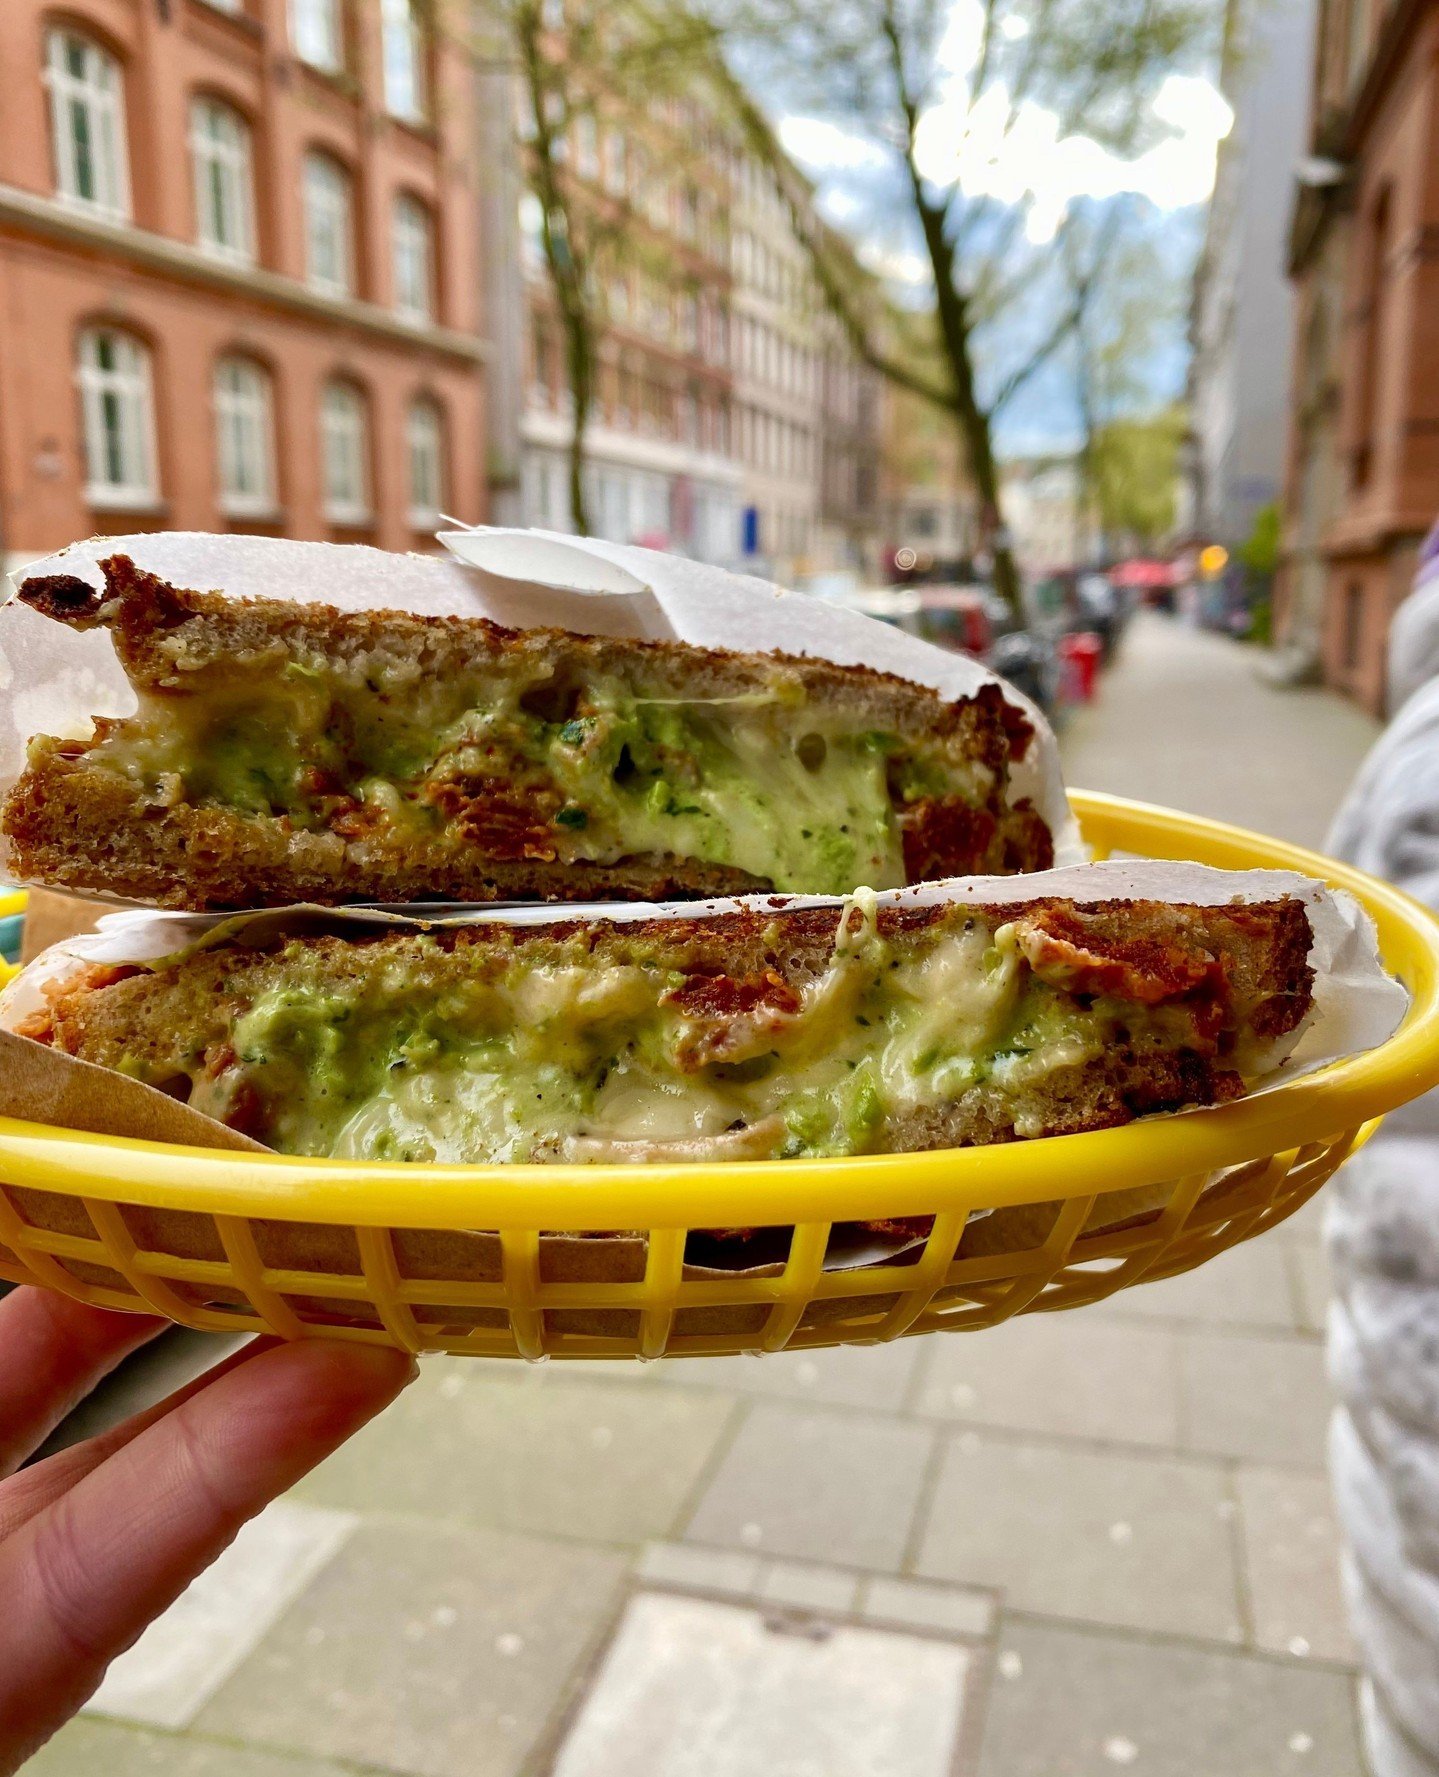 New secret special is called p.e.a.c.e . . . as in peas and cheese (and chorizo). 😆⁠
If you had it last year, you know it&acute;s 🧨⁠
Monday - Wednesday 12:00-15:00⁠
Thursday-Saturday 12:00-22:00⁠
Sunday 12:00-18:00⁠
⁠
⁠
⁠
#whoscoming #wednesday #ne